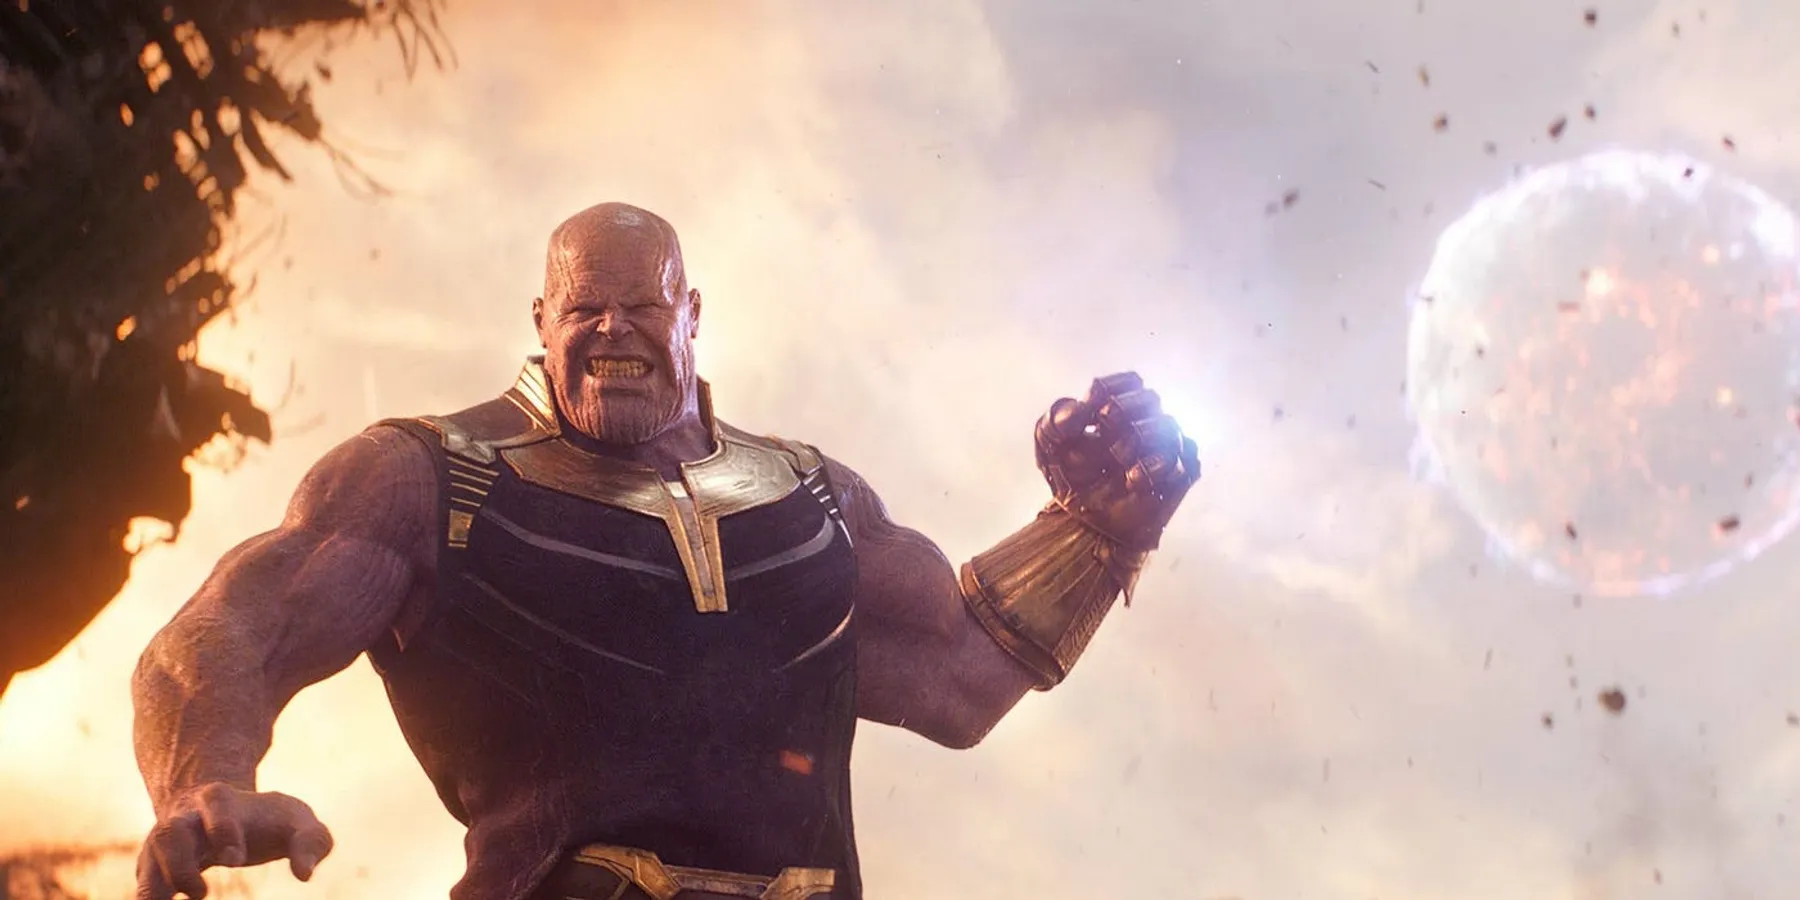 Thanos destroying a moon with his fist from Avengers